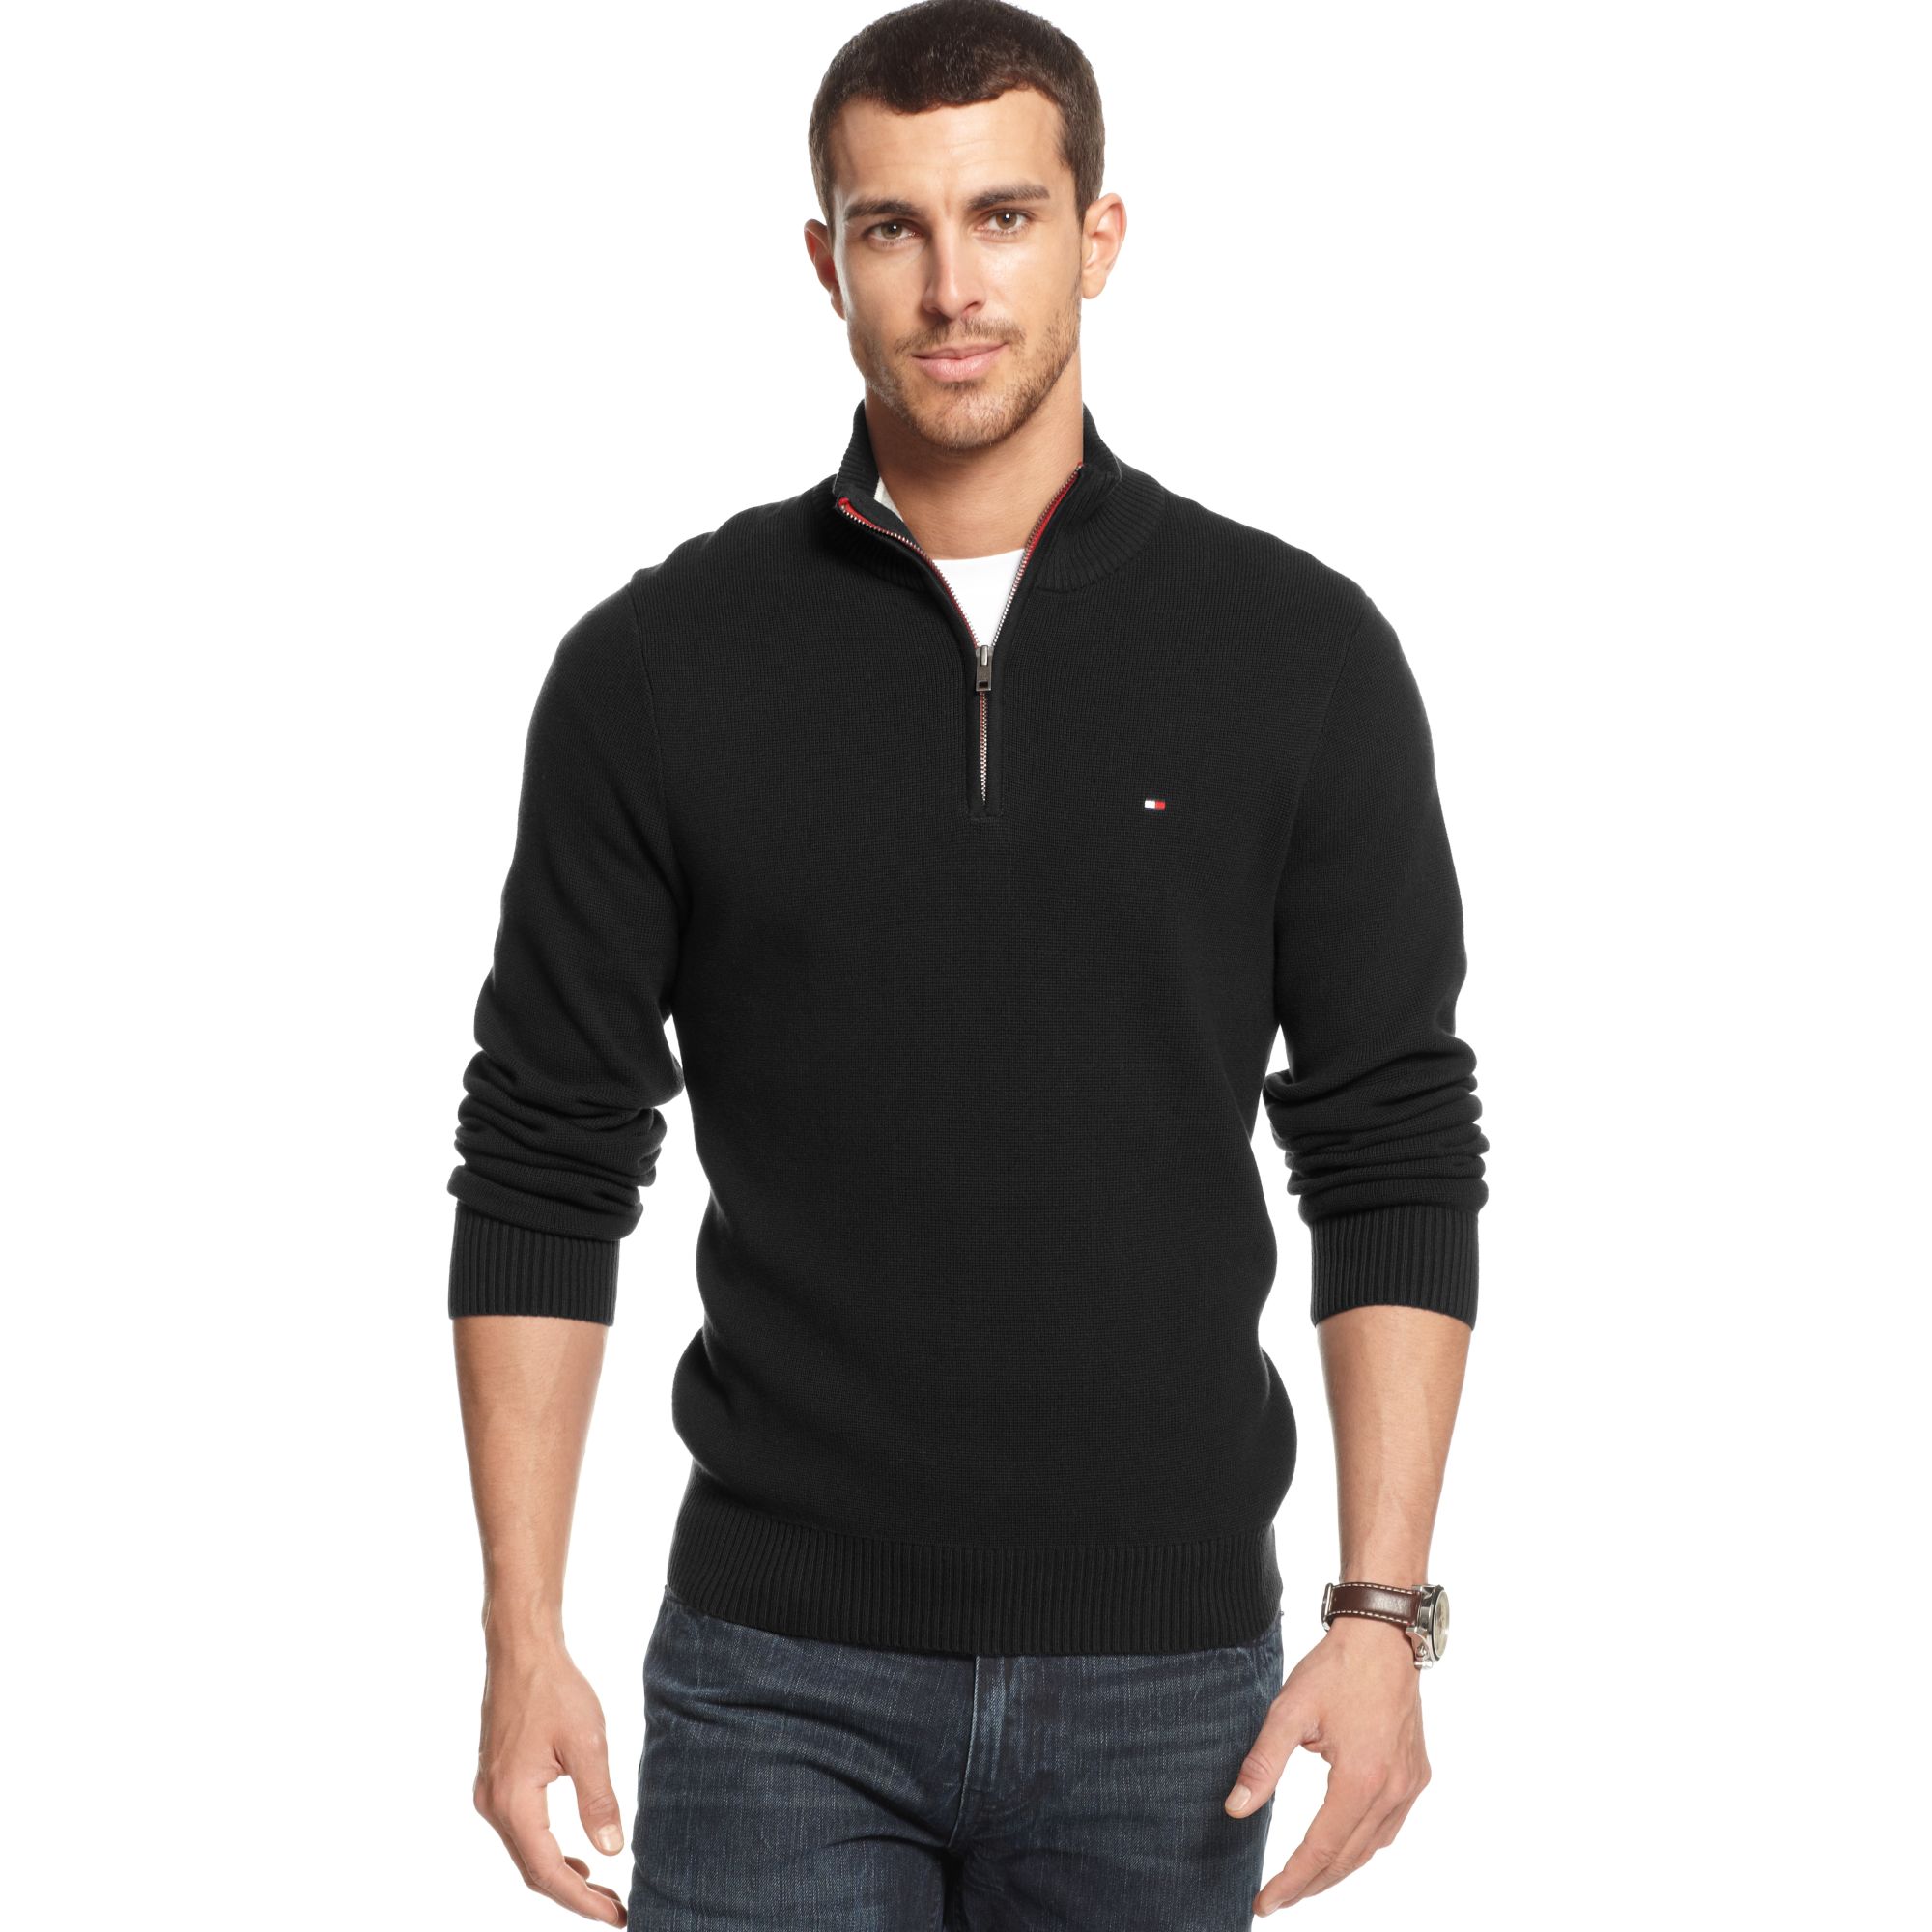 Tommy Hilfiger Zipped Sweater in Black for Men - Lyst